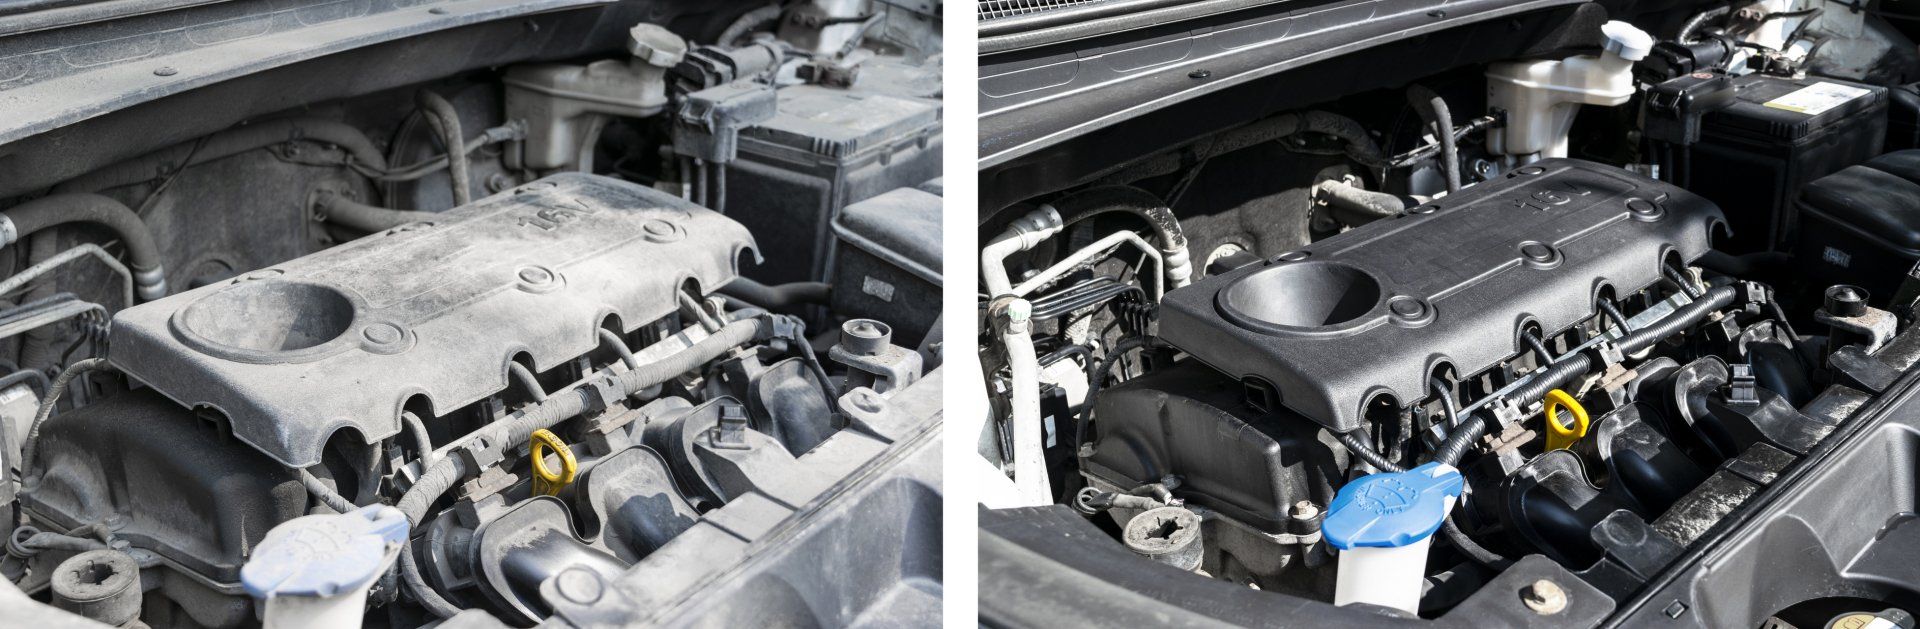 a before and after picture of an engine on a car after it was cleaned and detailed